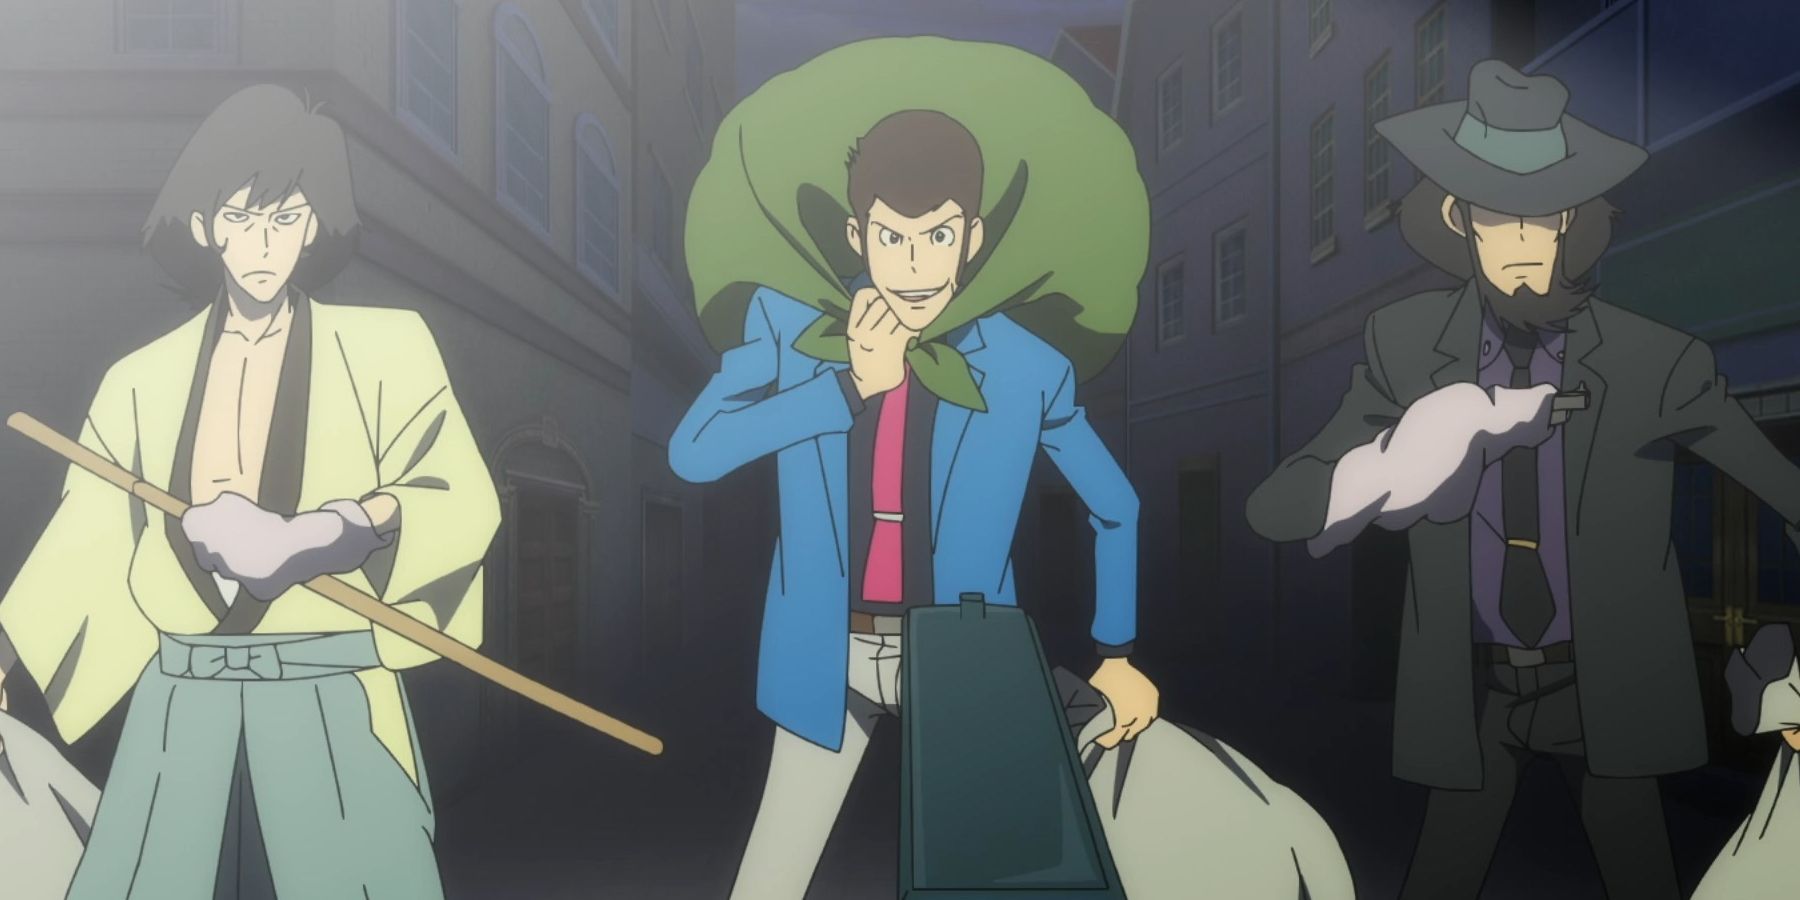 Lupin The 3rd Part 6 anime